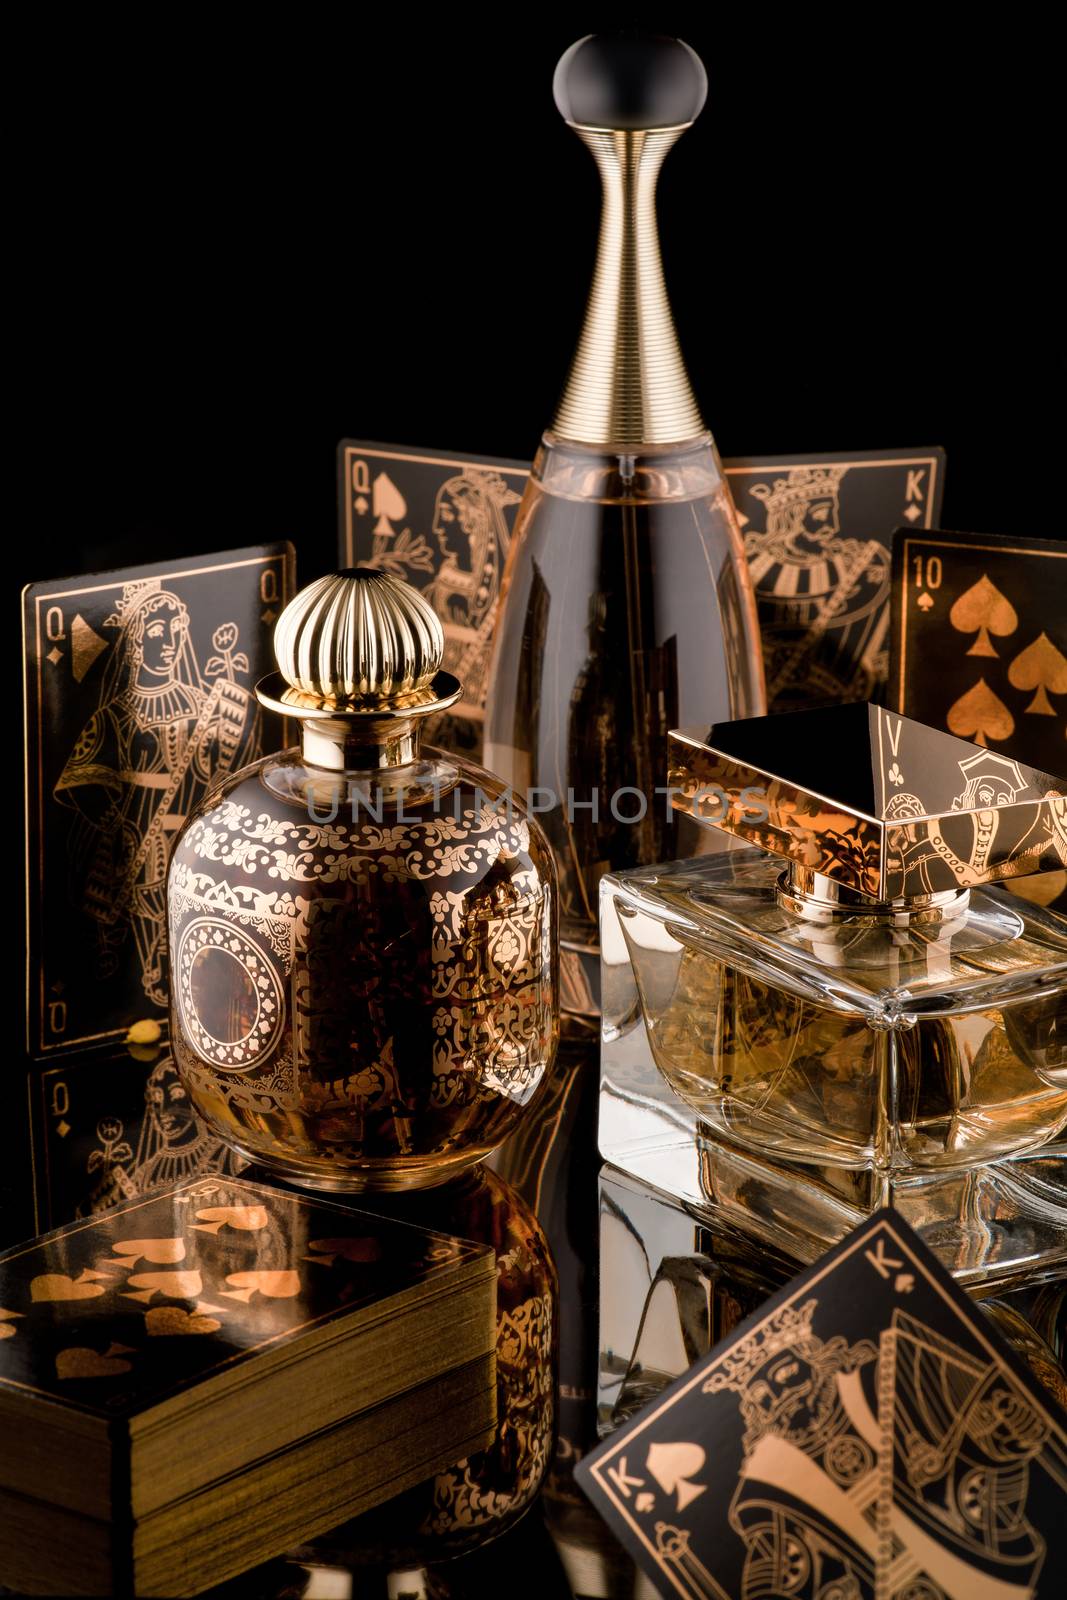 composition of luxurious women's perfume and playing cards with reflection on a black background